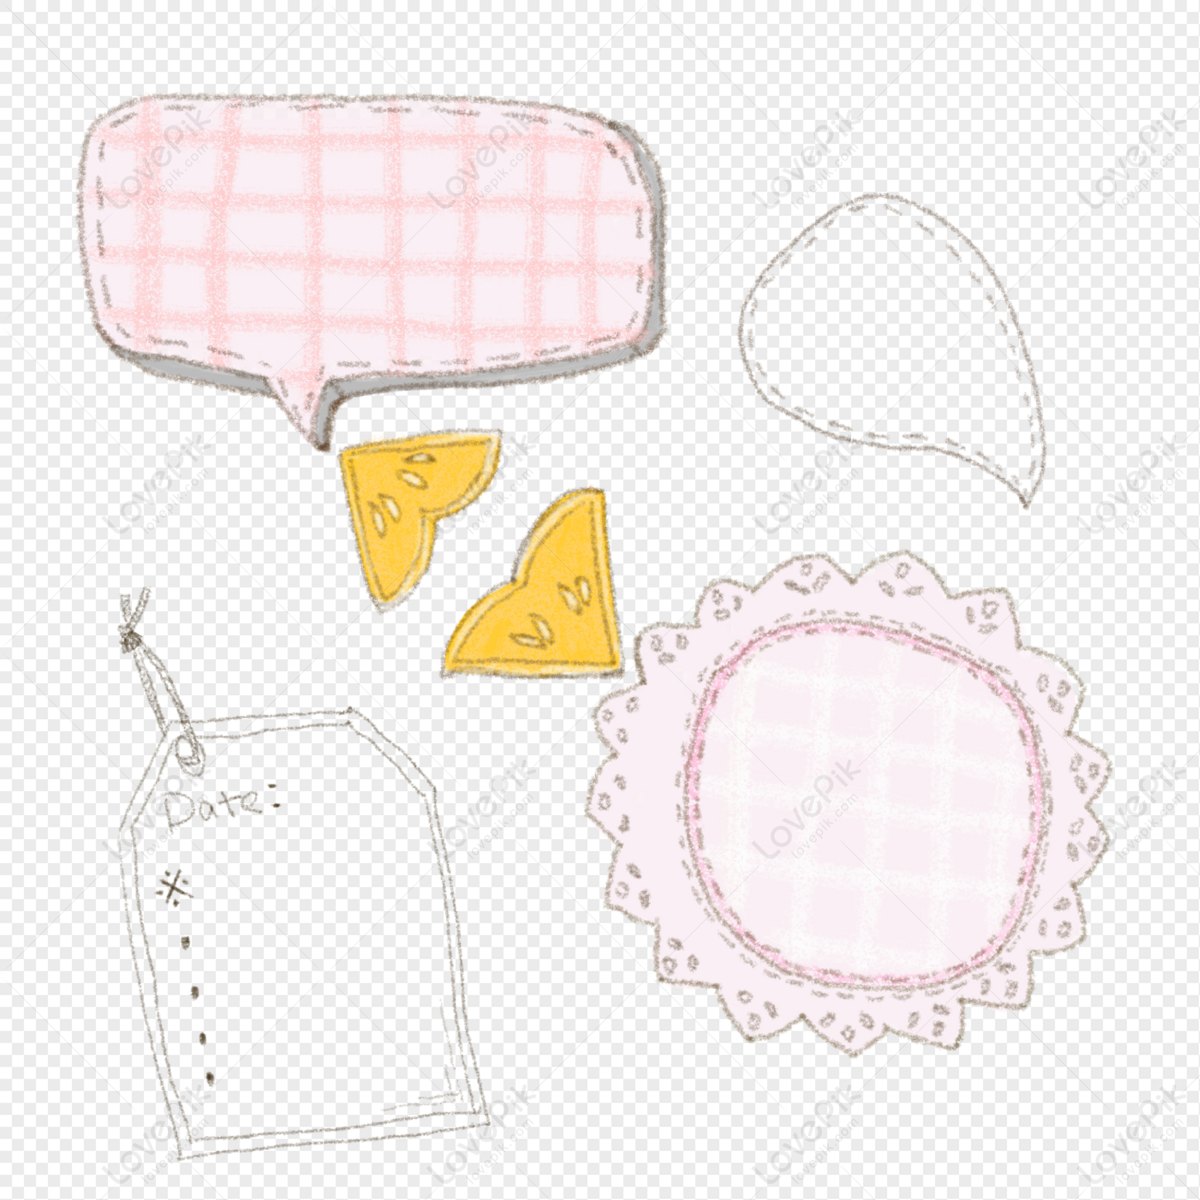 Net PNG Images With Transparent Background